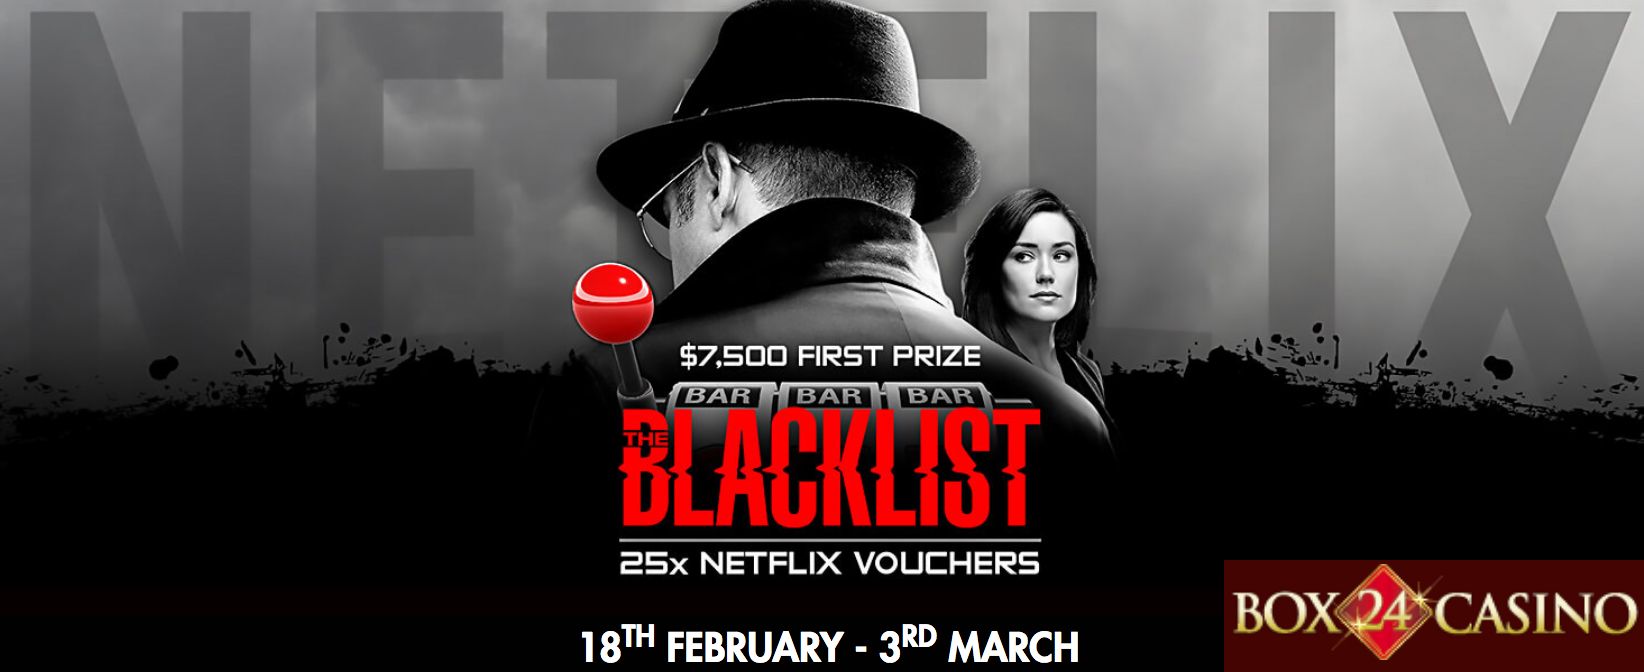 Win a Share of $15,000 in The Blacklist Season 6 Netflix Promotion at Box 24 Casino